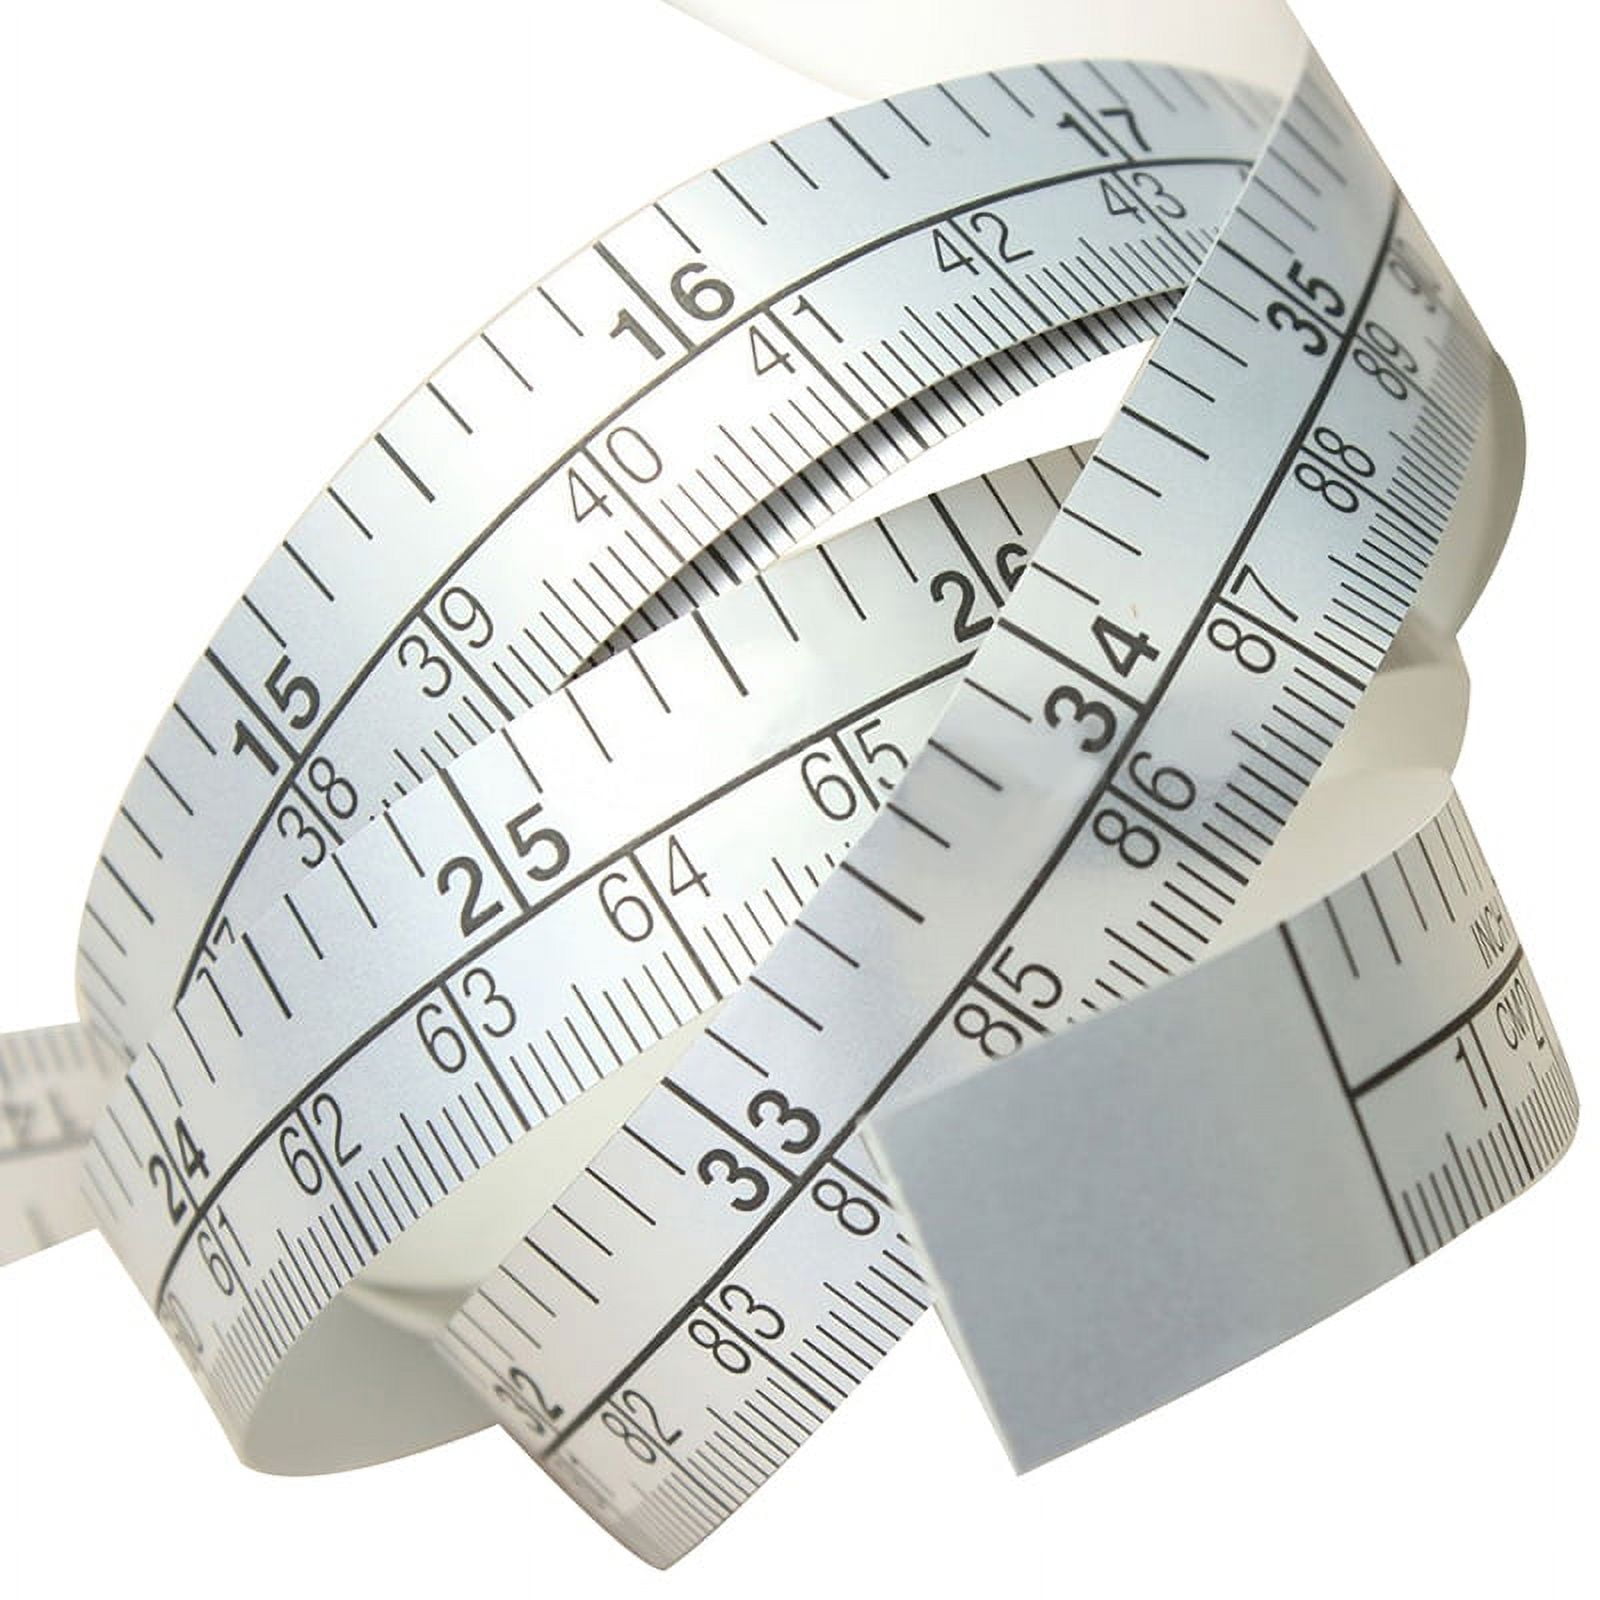 Floral Magnetic Tape Measure: 150 Cm Long. Metric and Imperial. 